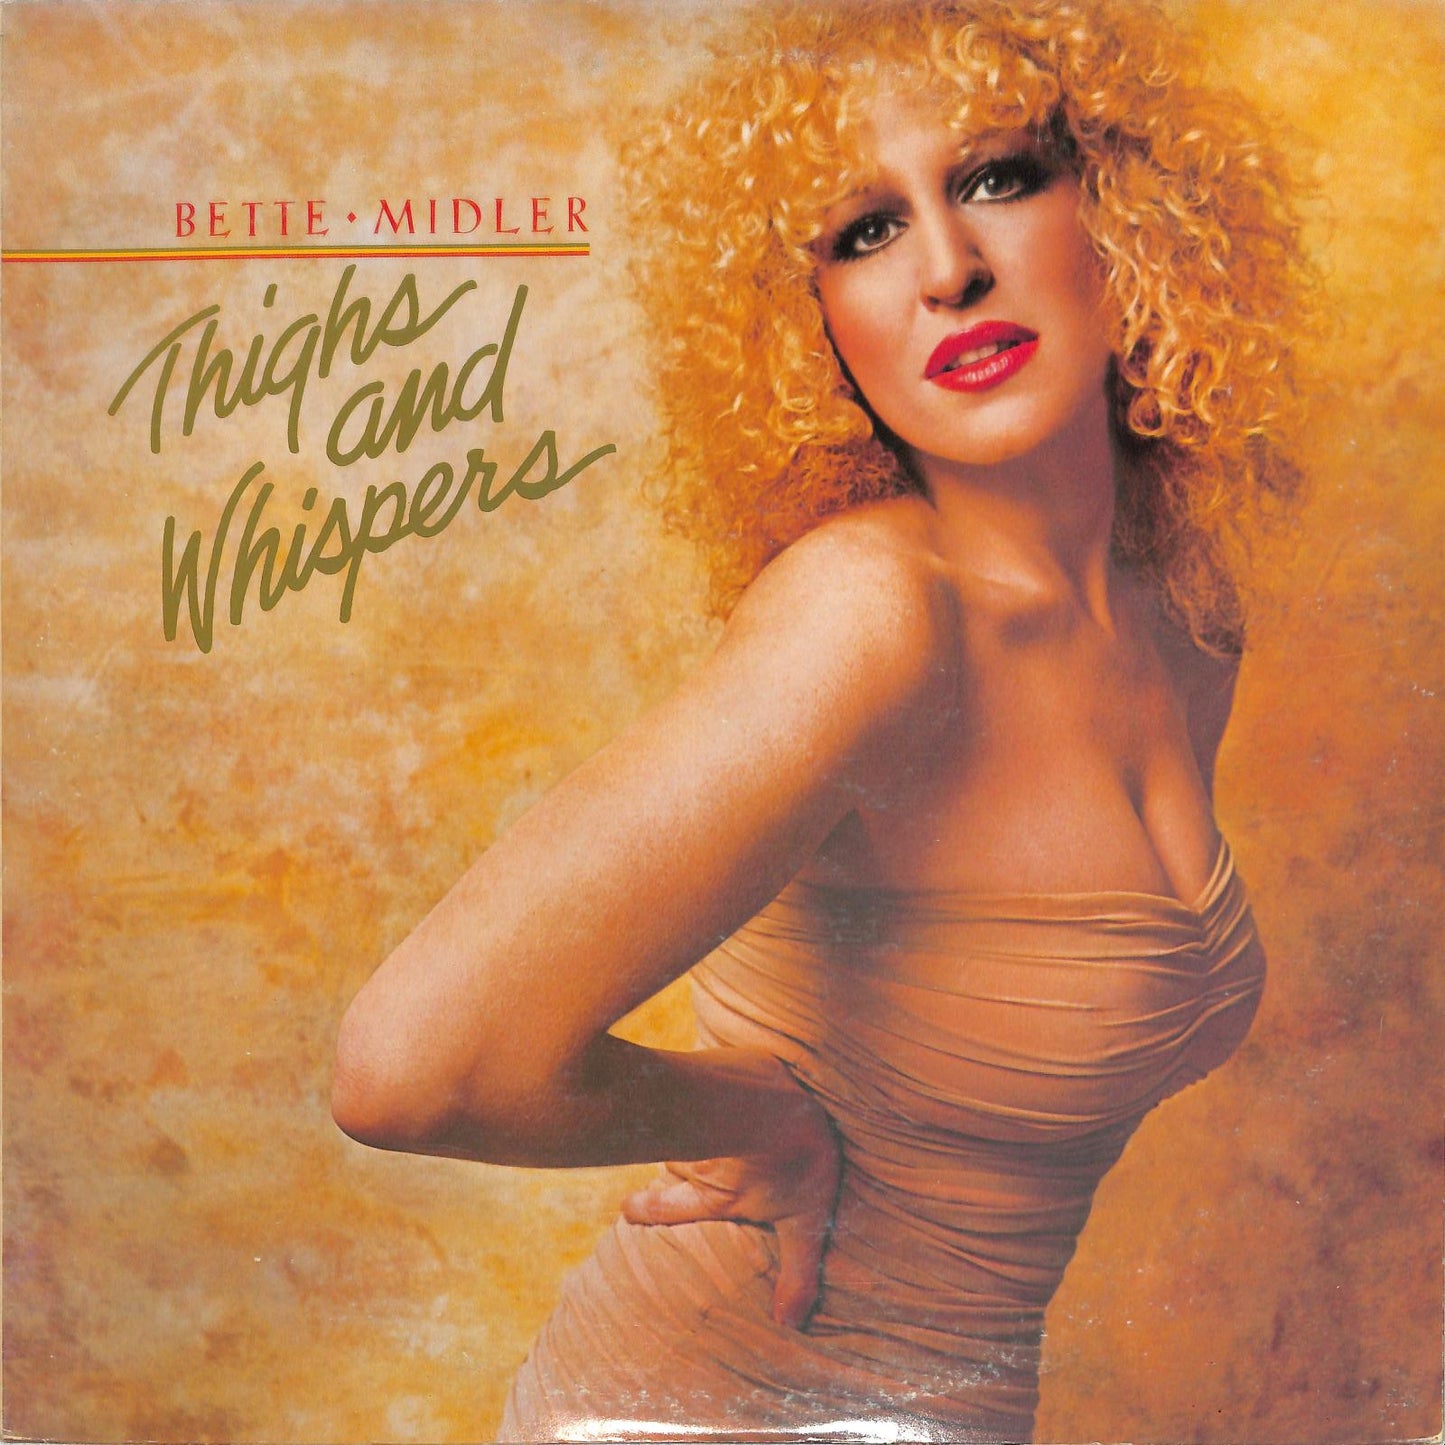 BETTE MIDLER - Thighs And Whispers